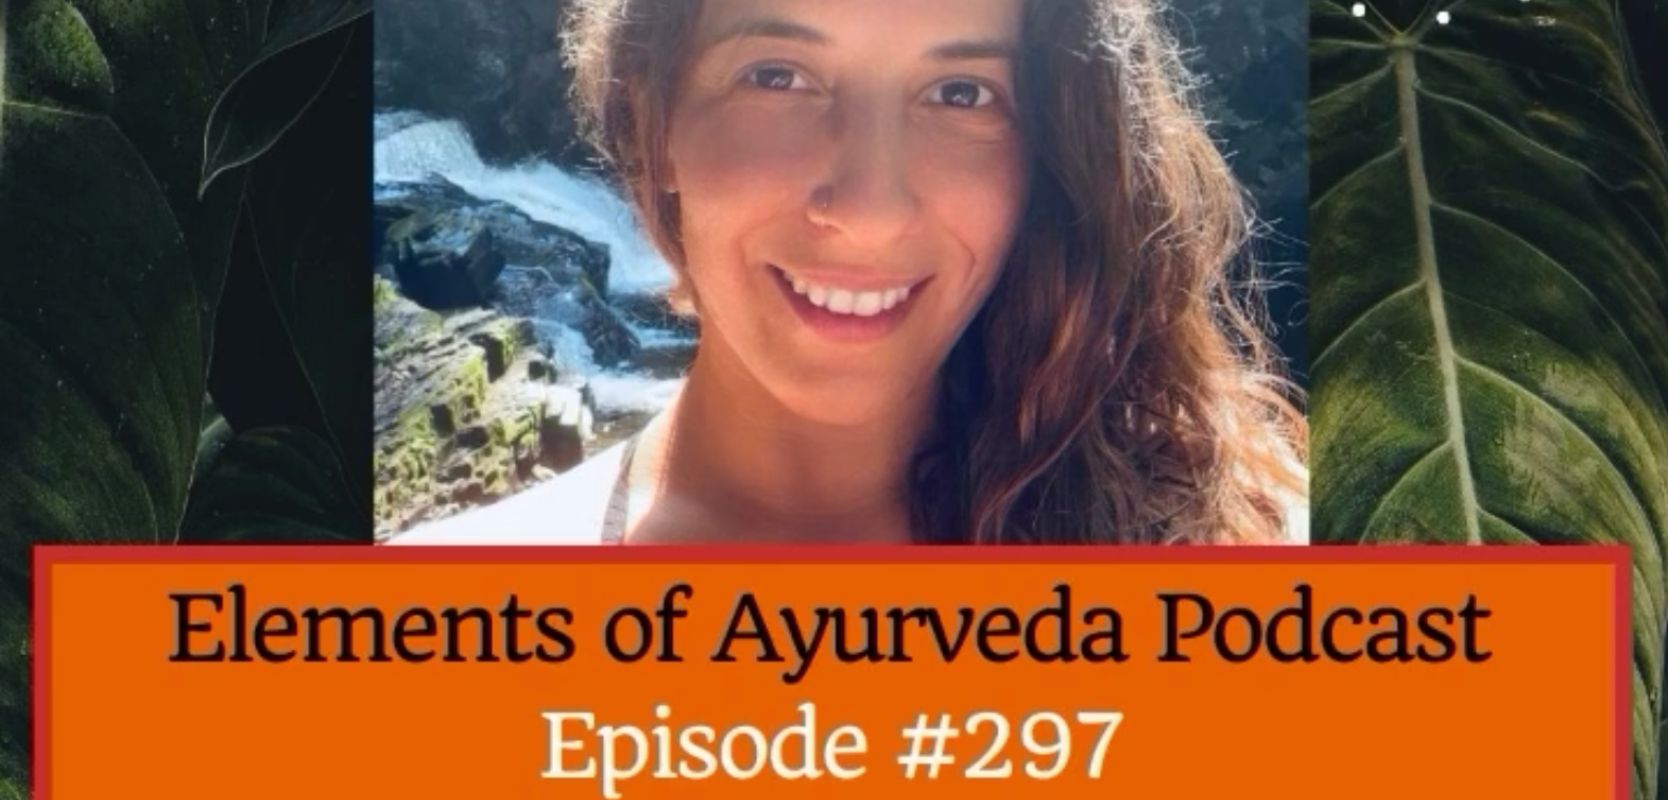 Featured image for “Real Talk on Ayurveda & Yoga in the West on Elements of Ayurveda Podcast”